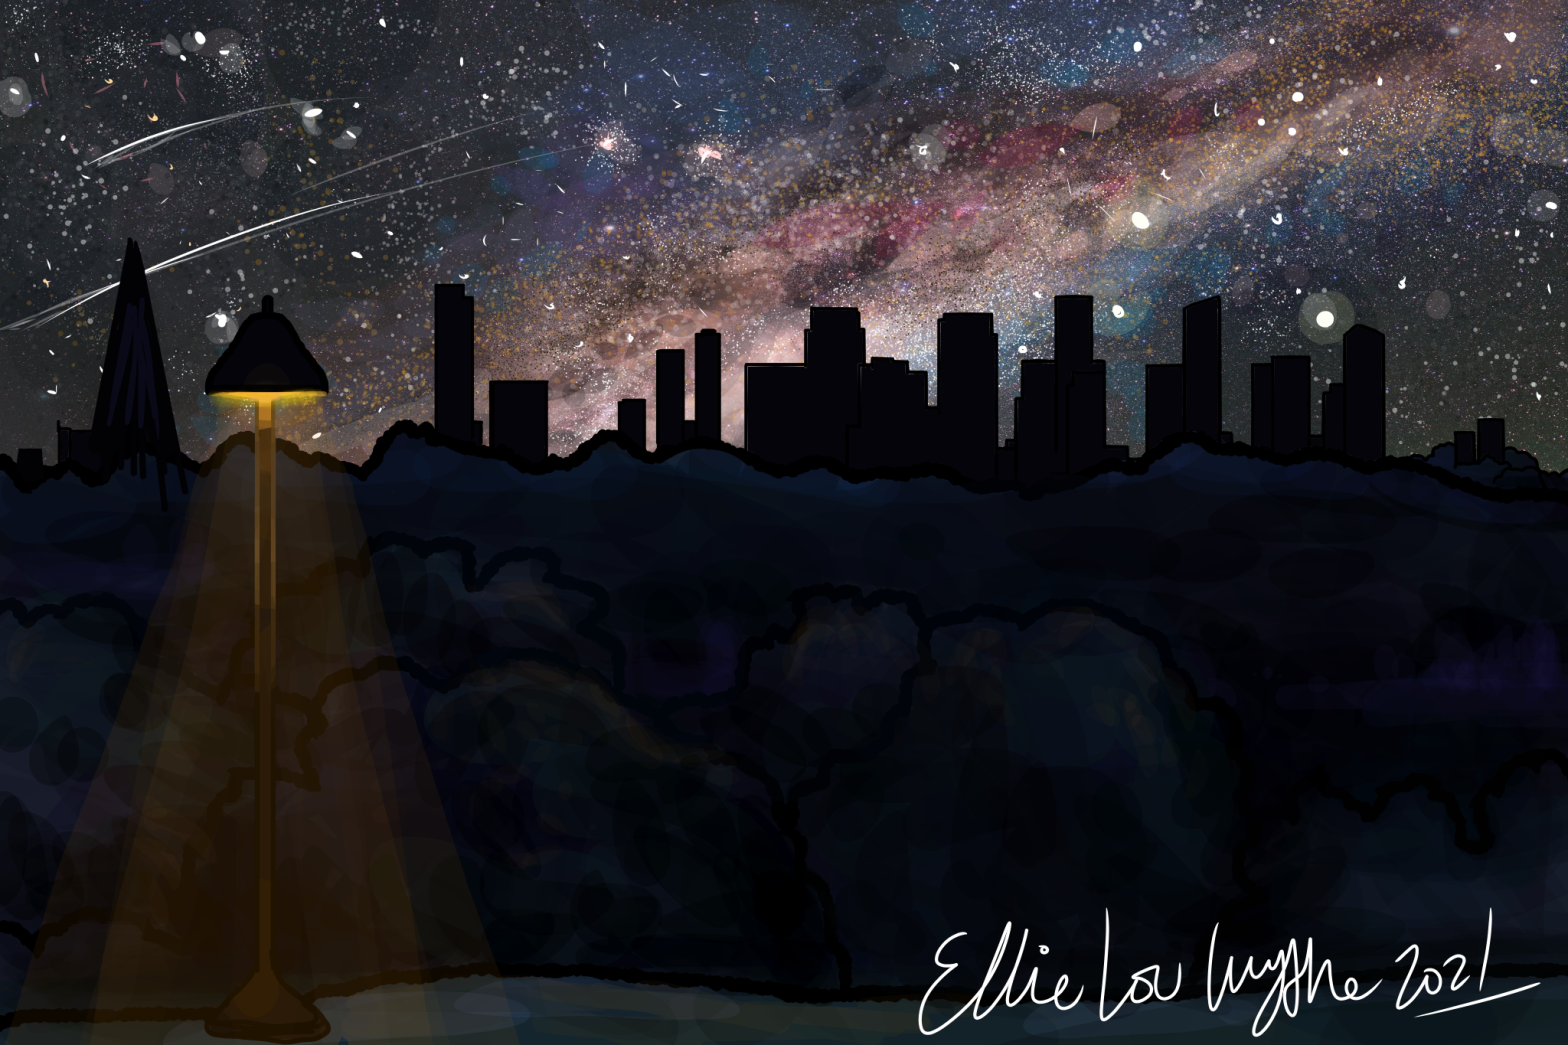 Digital painting. Foreground shows well-shielded amber coloured street light, background shows dark parkland, dark city skyline and a bright night sky with Milky Way and shooting stars.